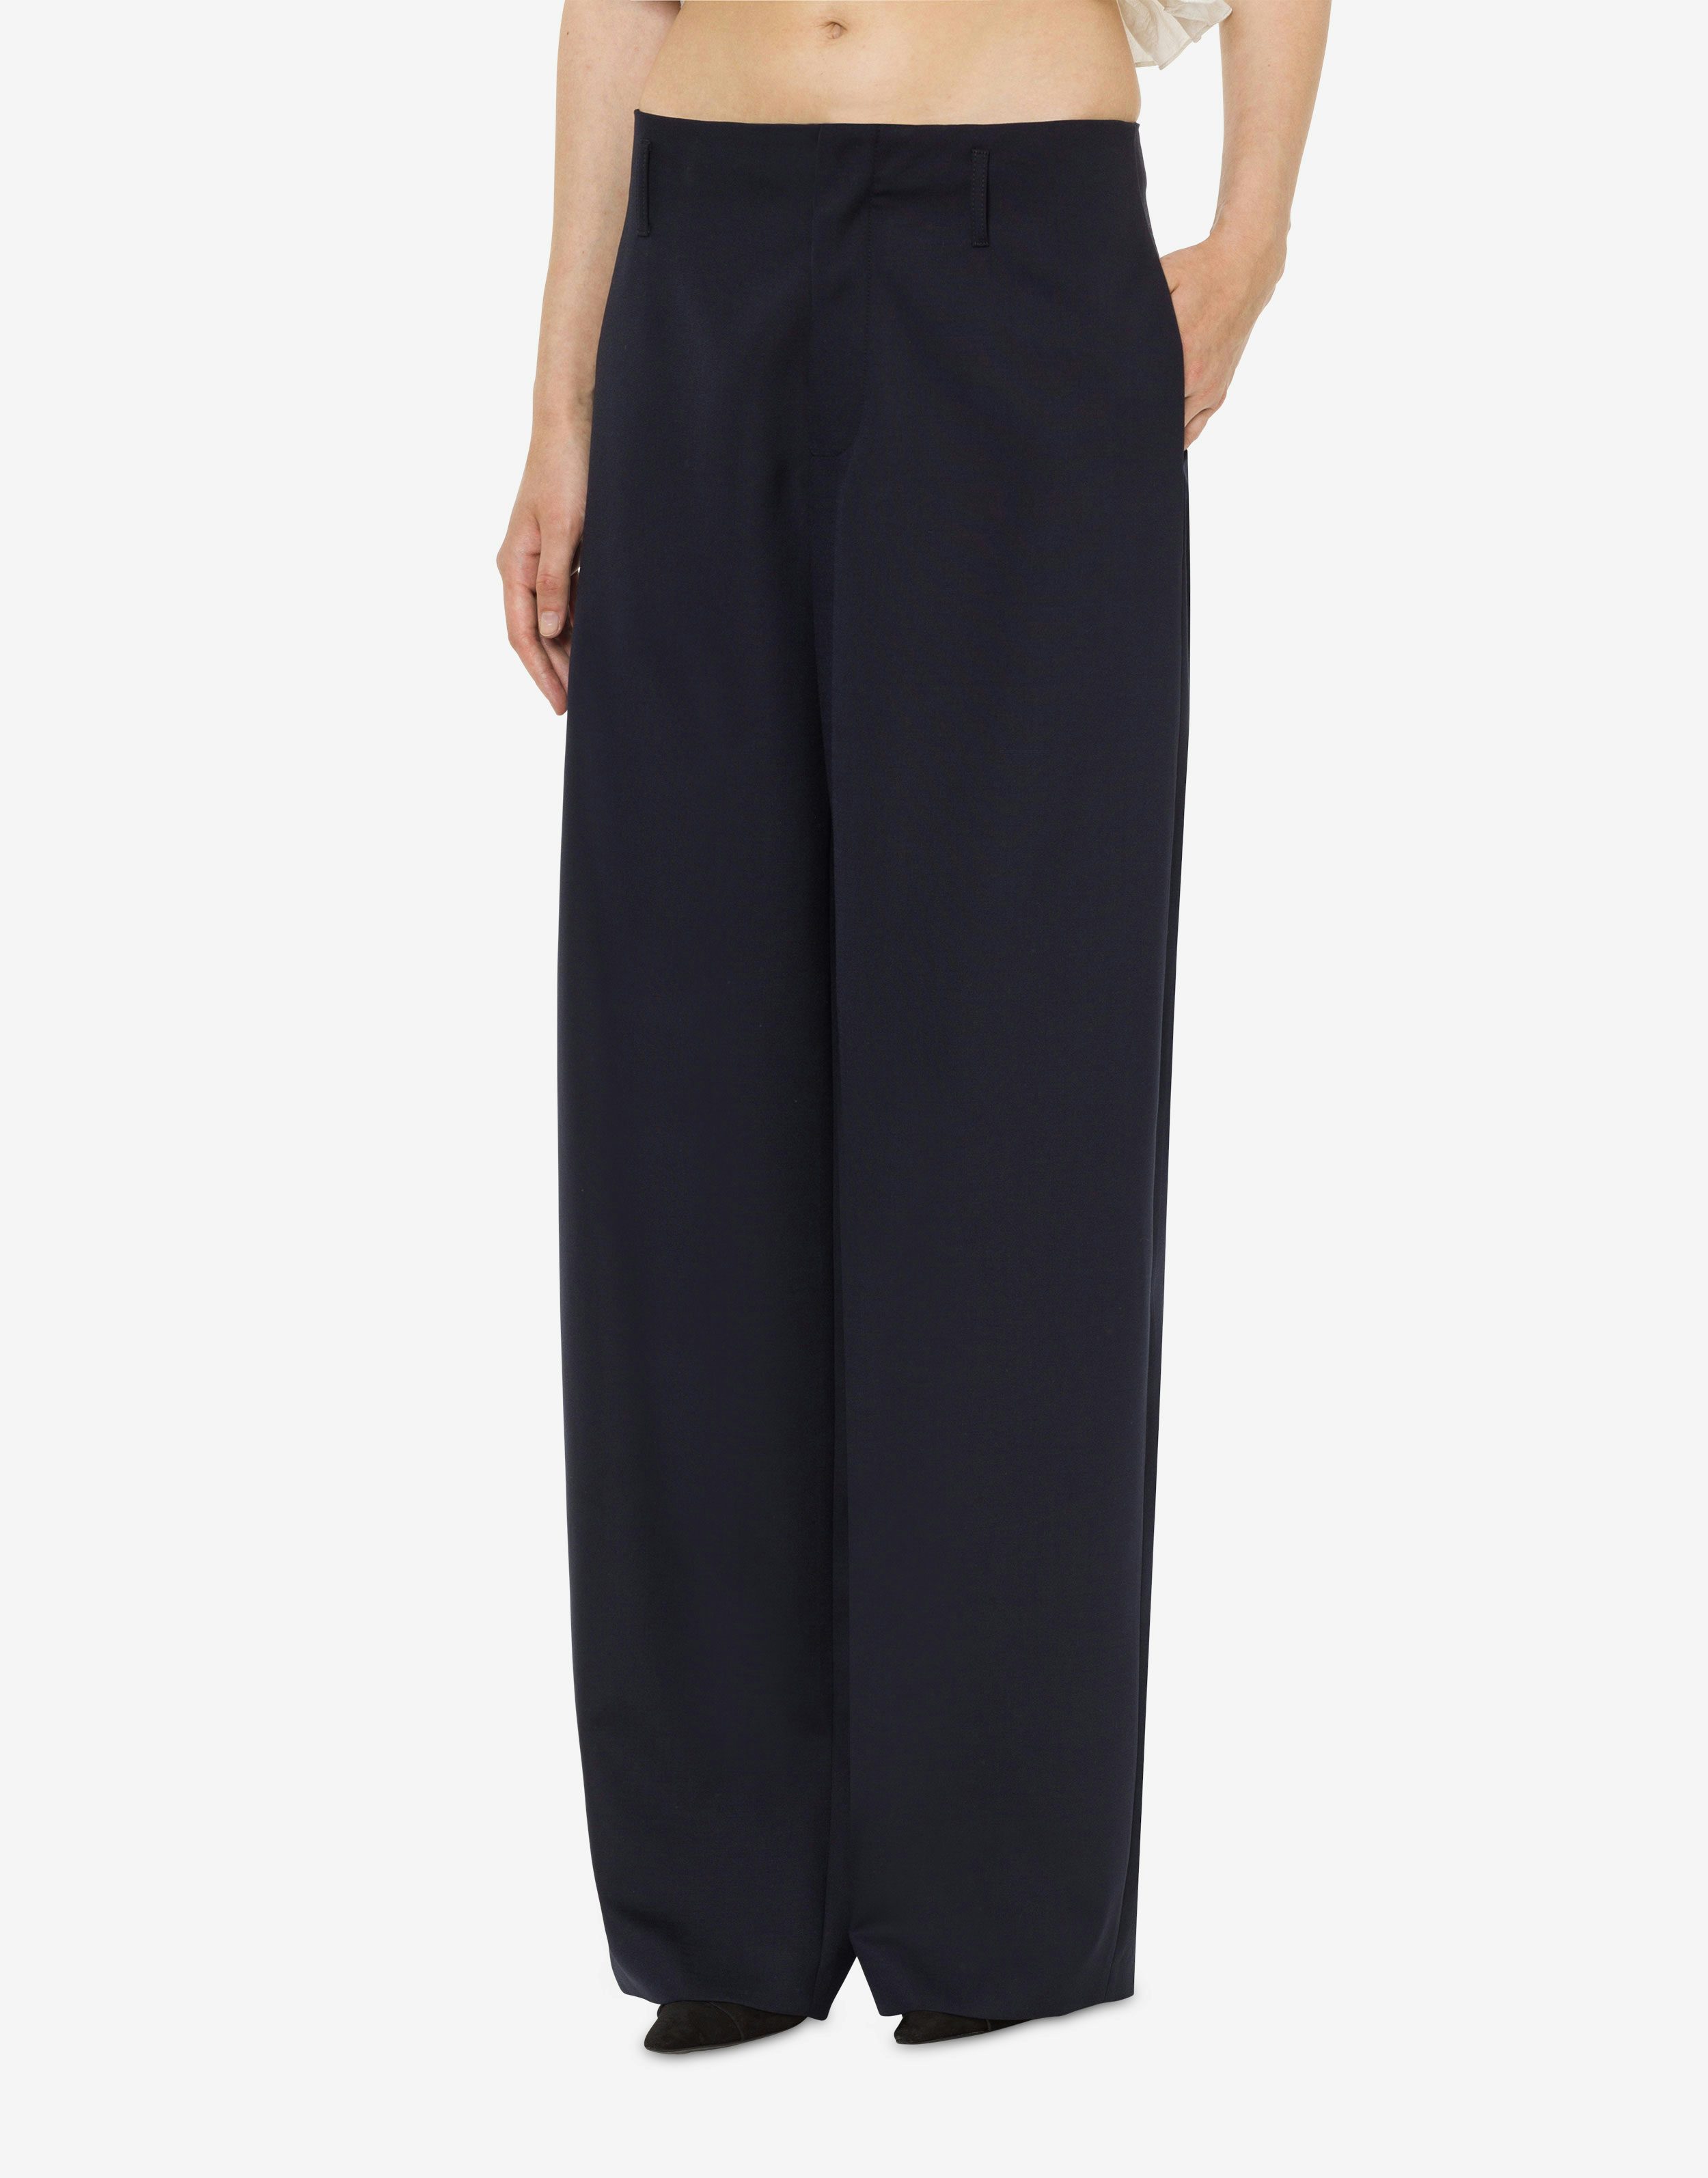 Over-sized trousers in light stretch wool